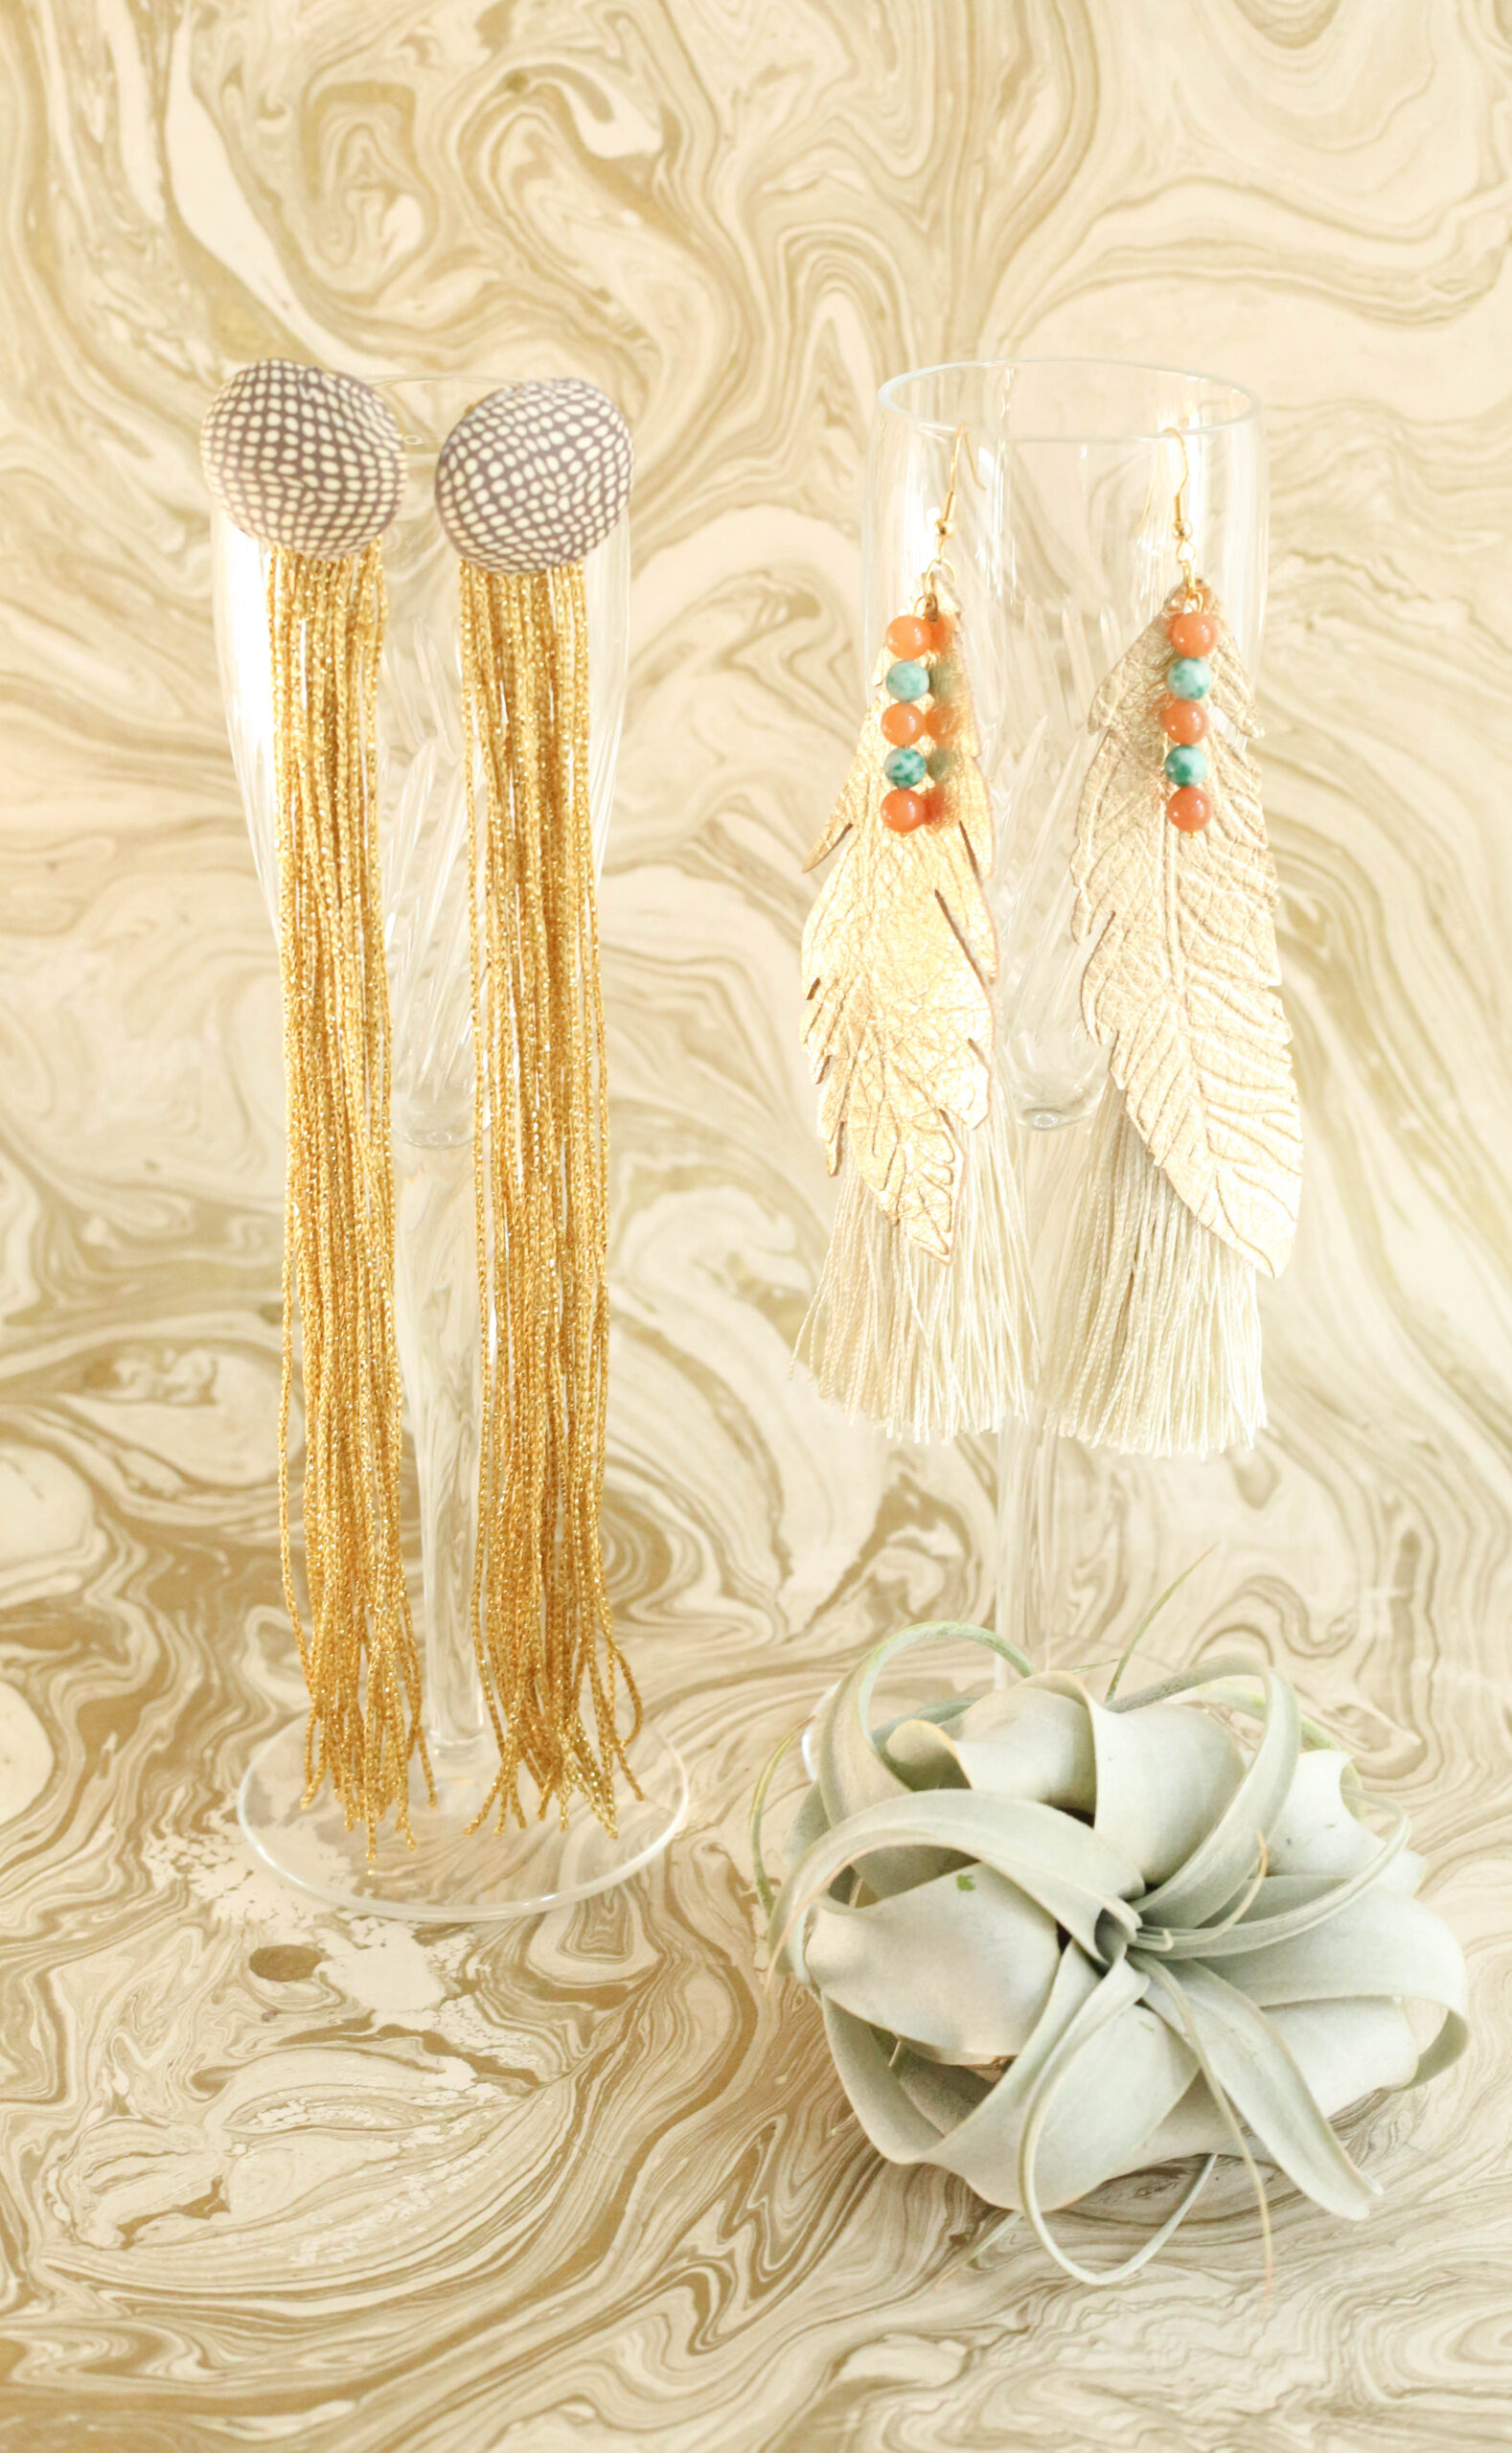 Boho glam statement earrings made by hand